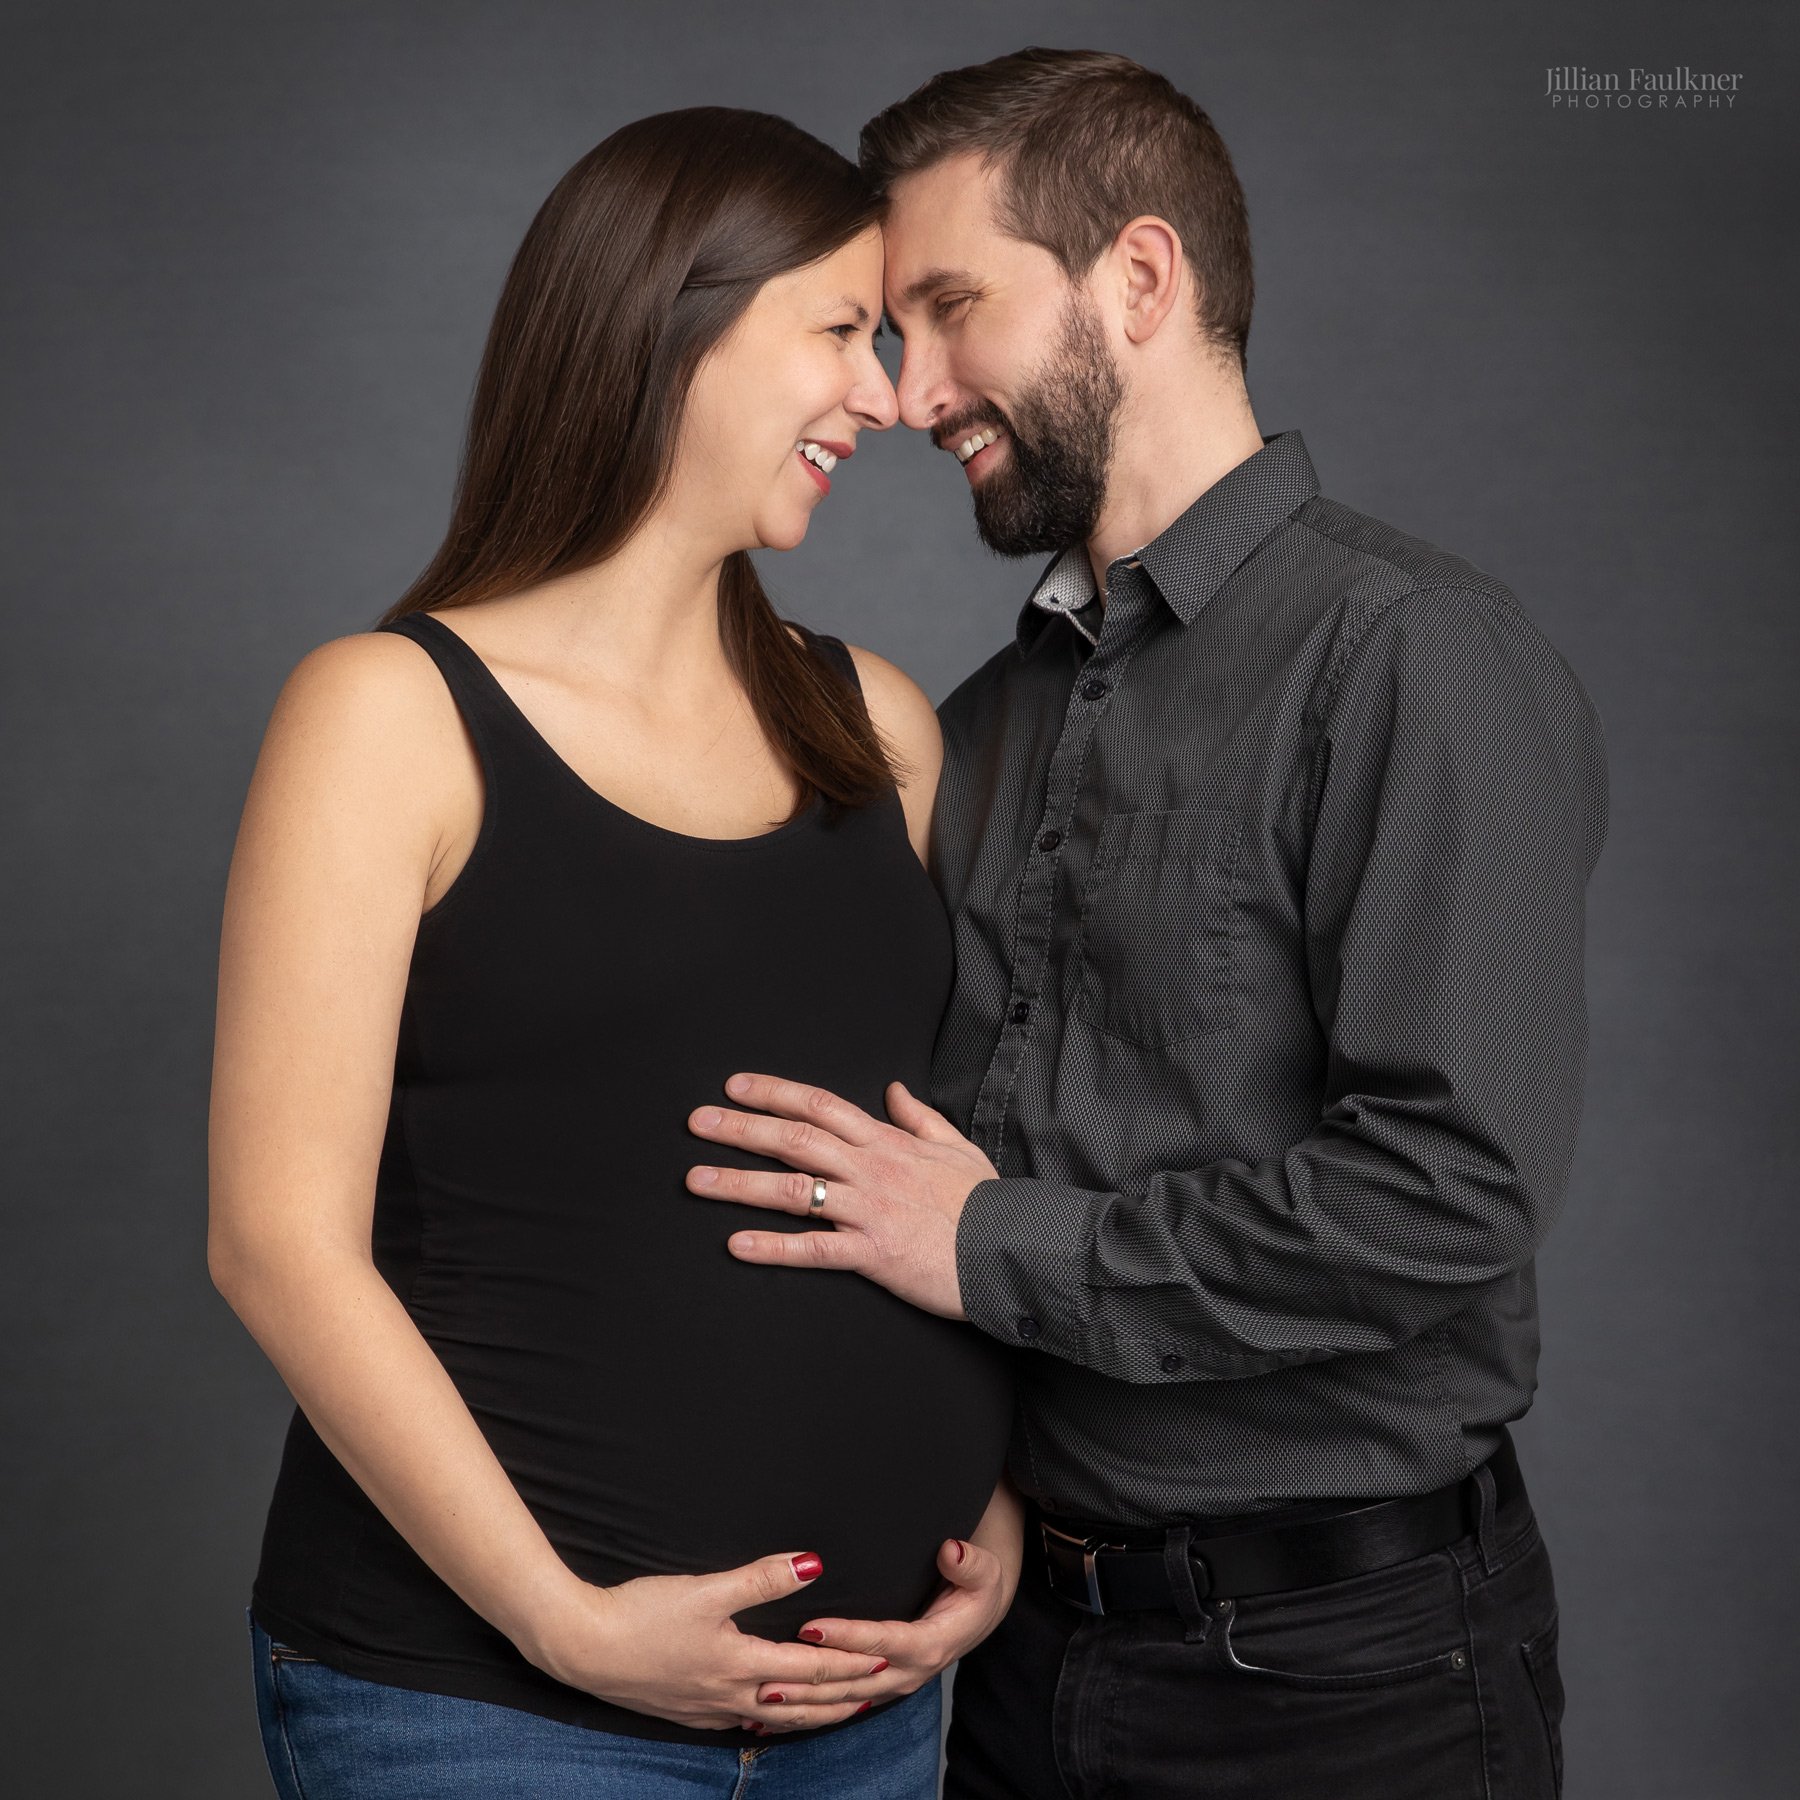 Everything You Need to Know Before Your Maternity Photography Session